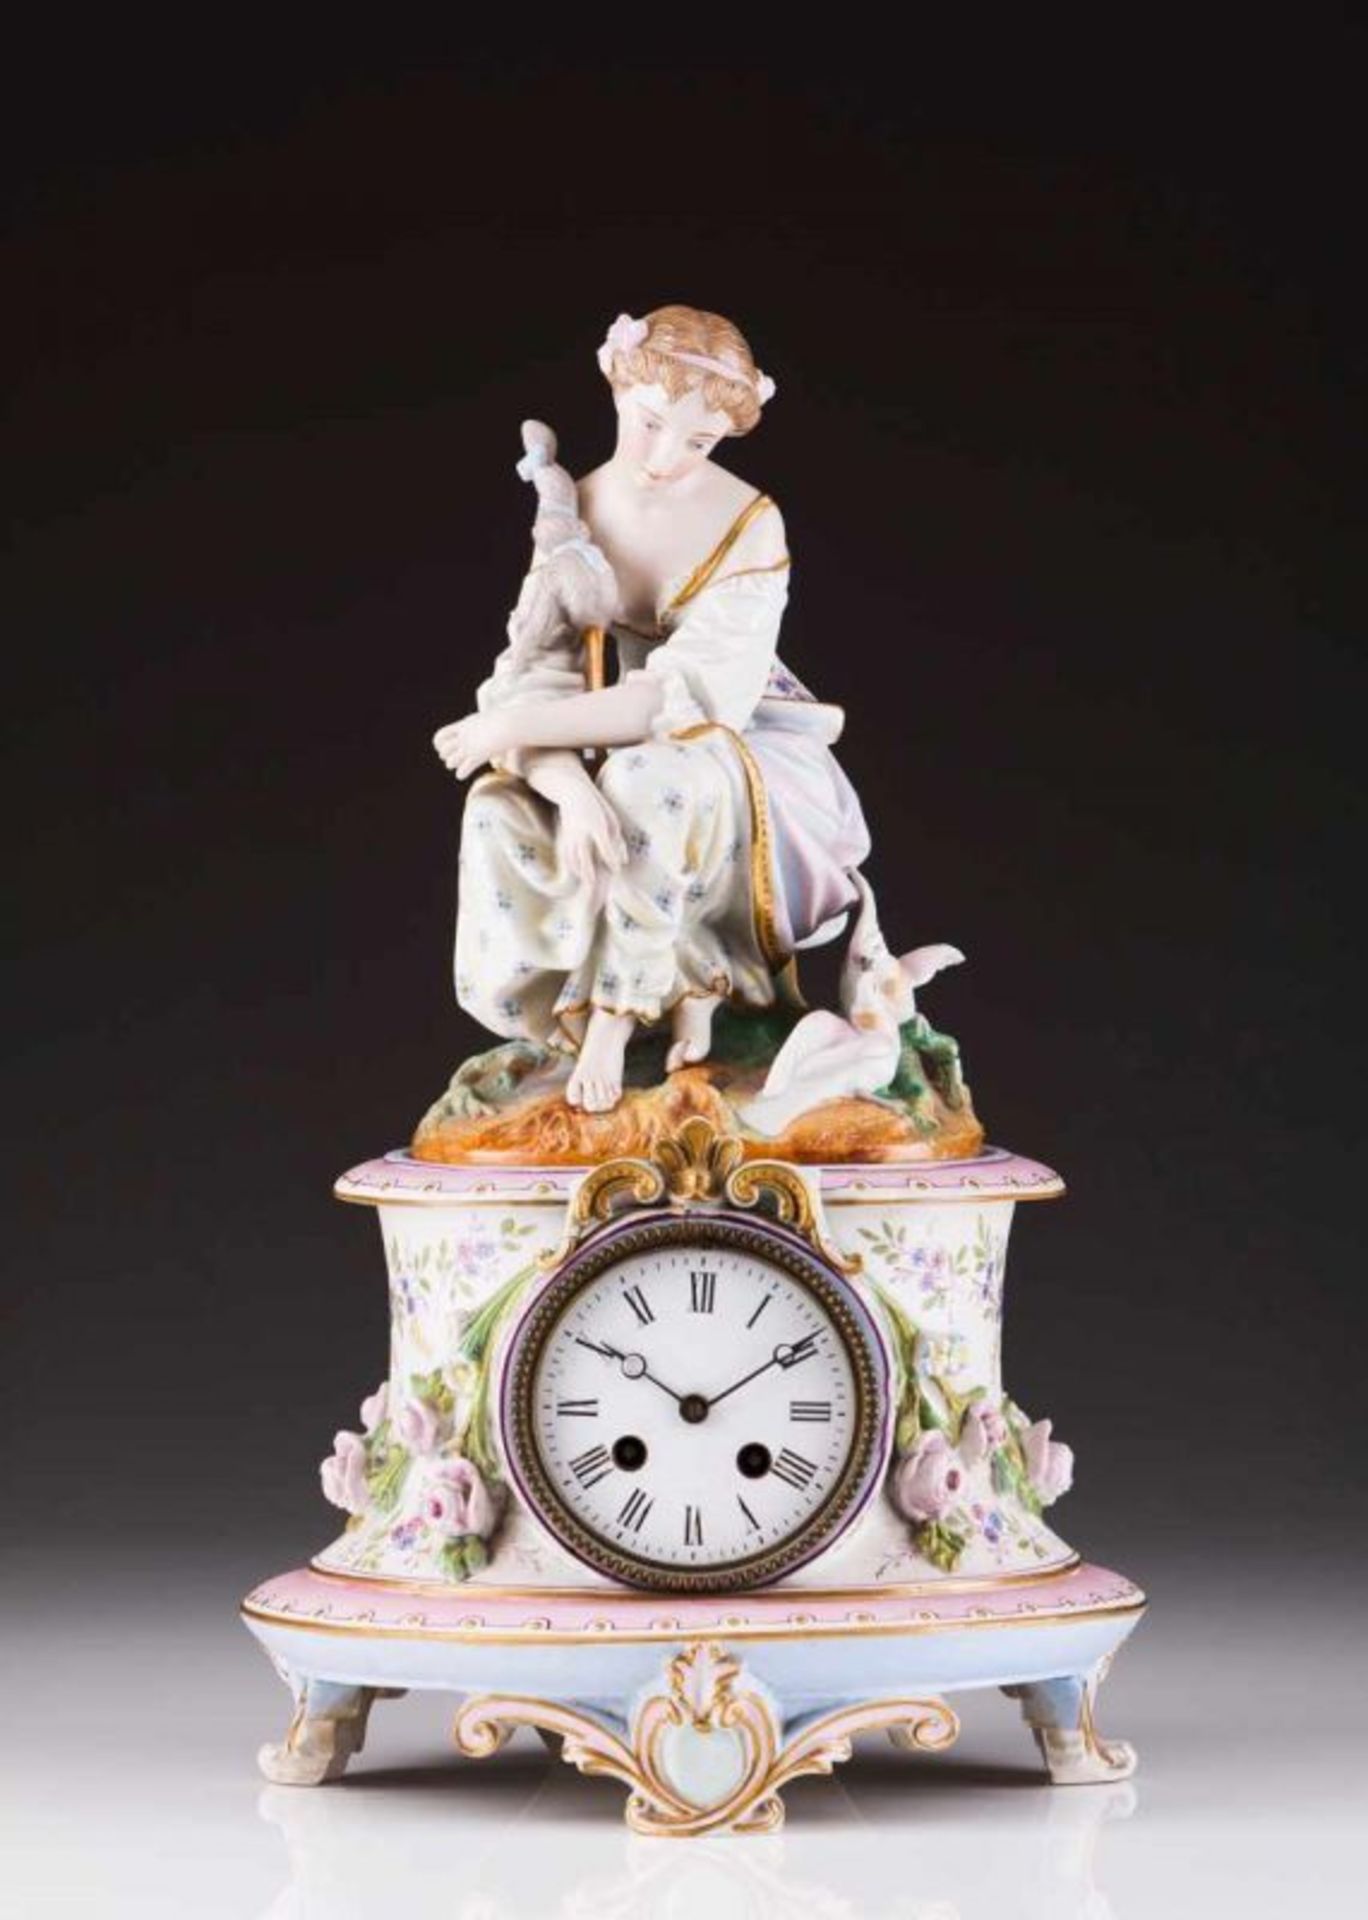 A table clock Polychrome biscuit porcelain representing spinner and floral motifs Enamel dial